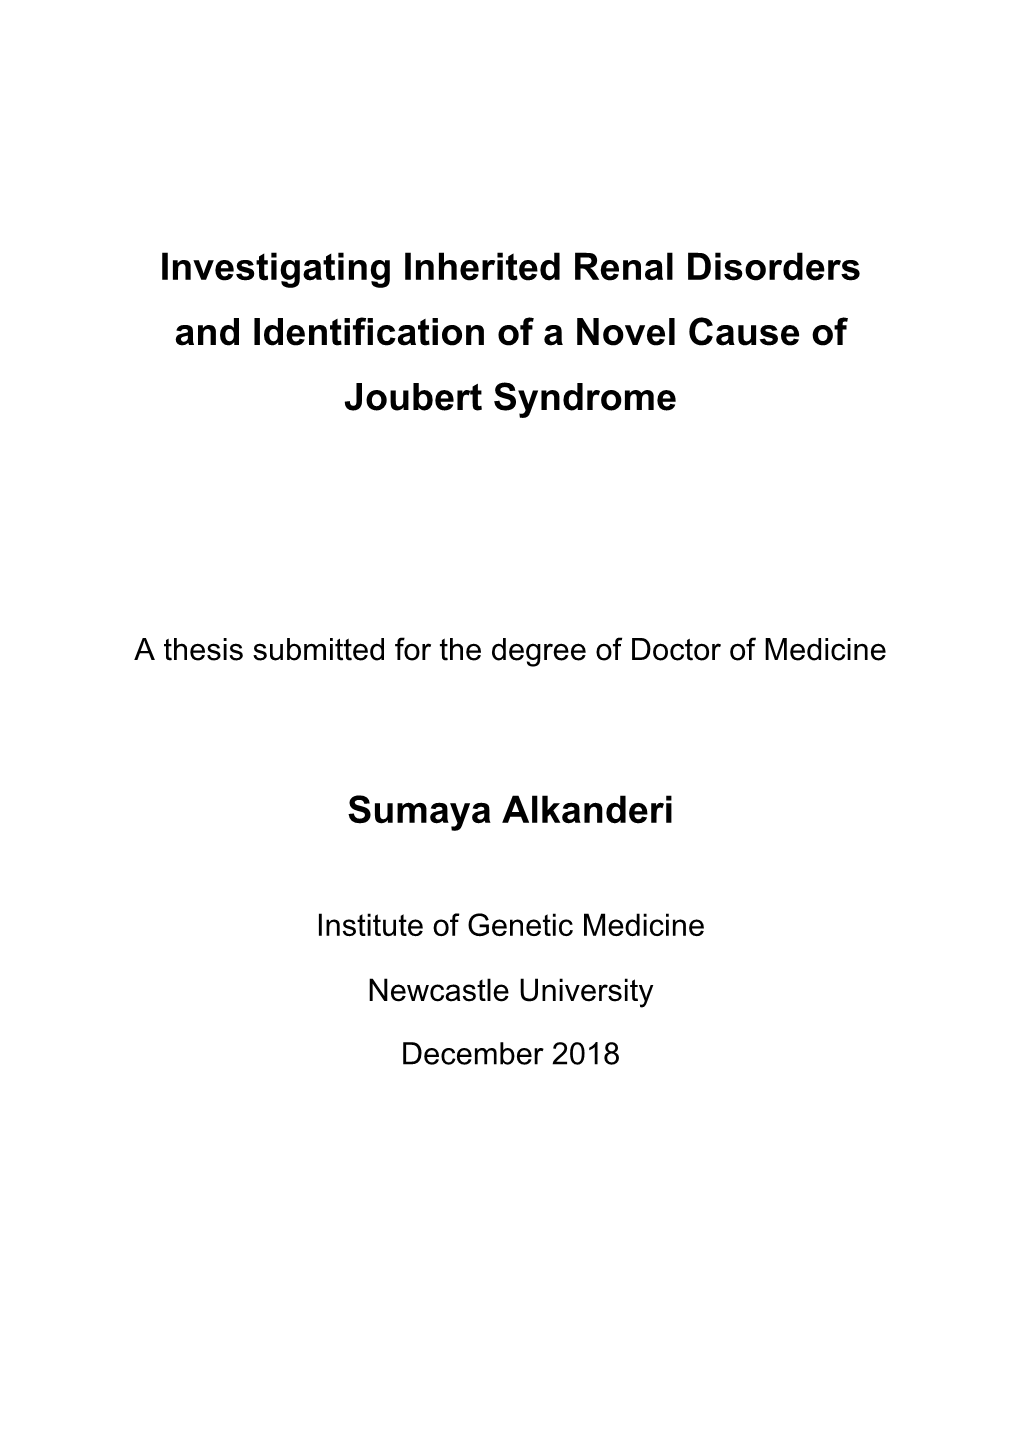 Investigating Inherited Renal Disorders and Identification of a Novel Cause of Joubert Syndrome